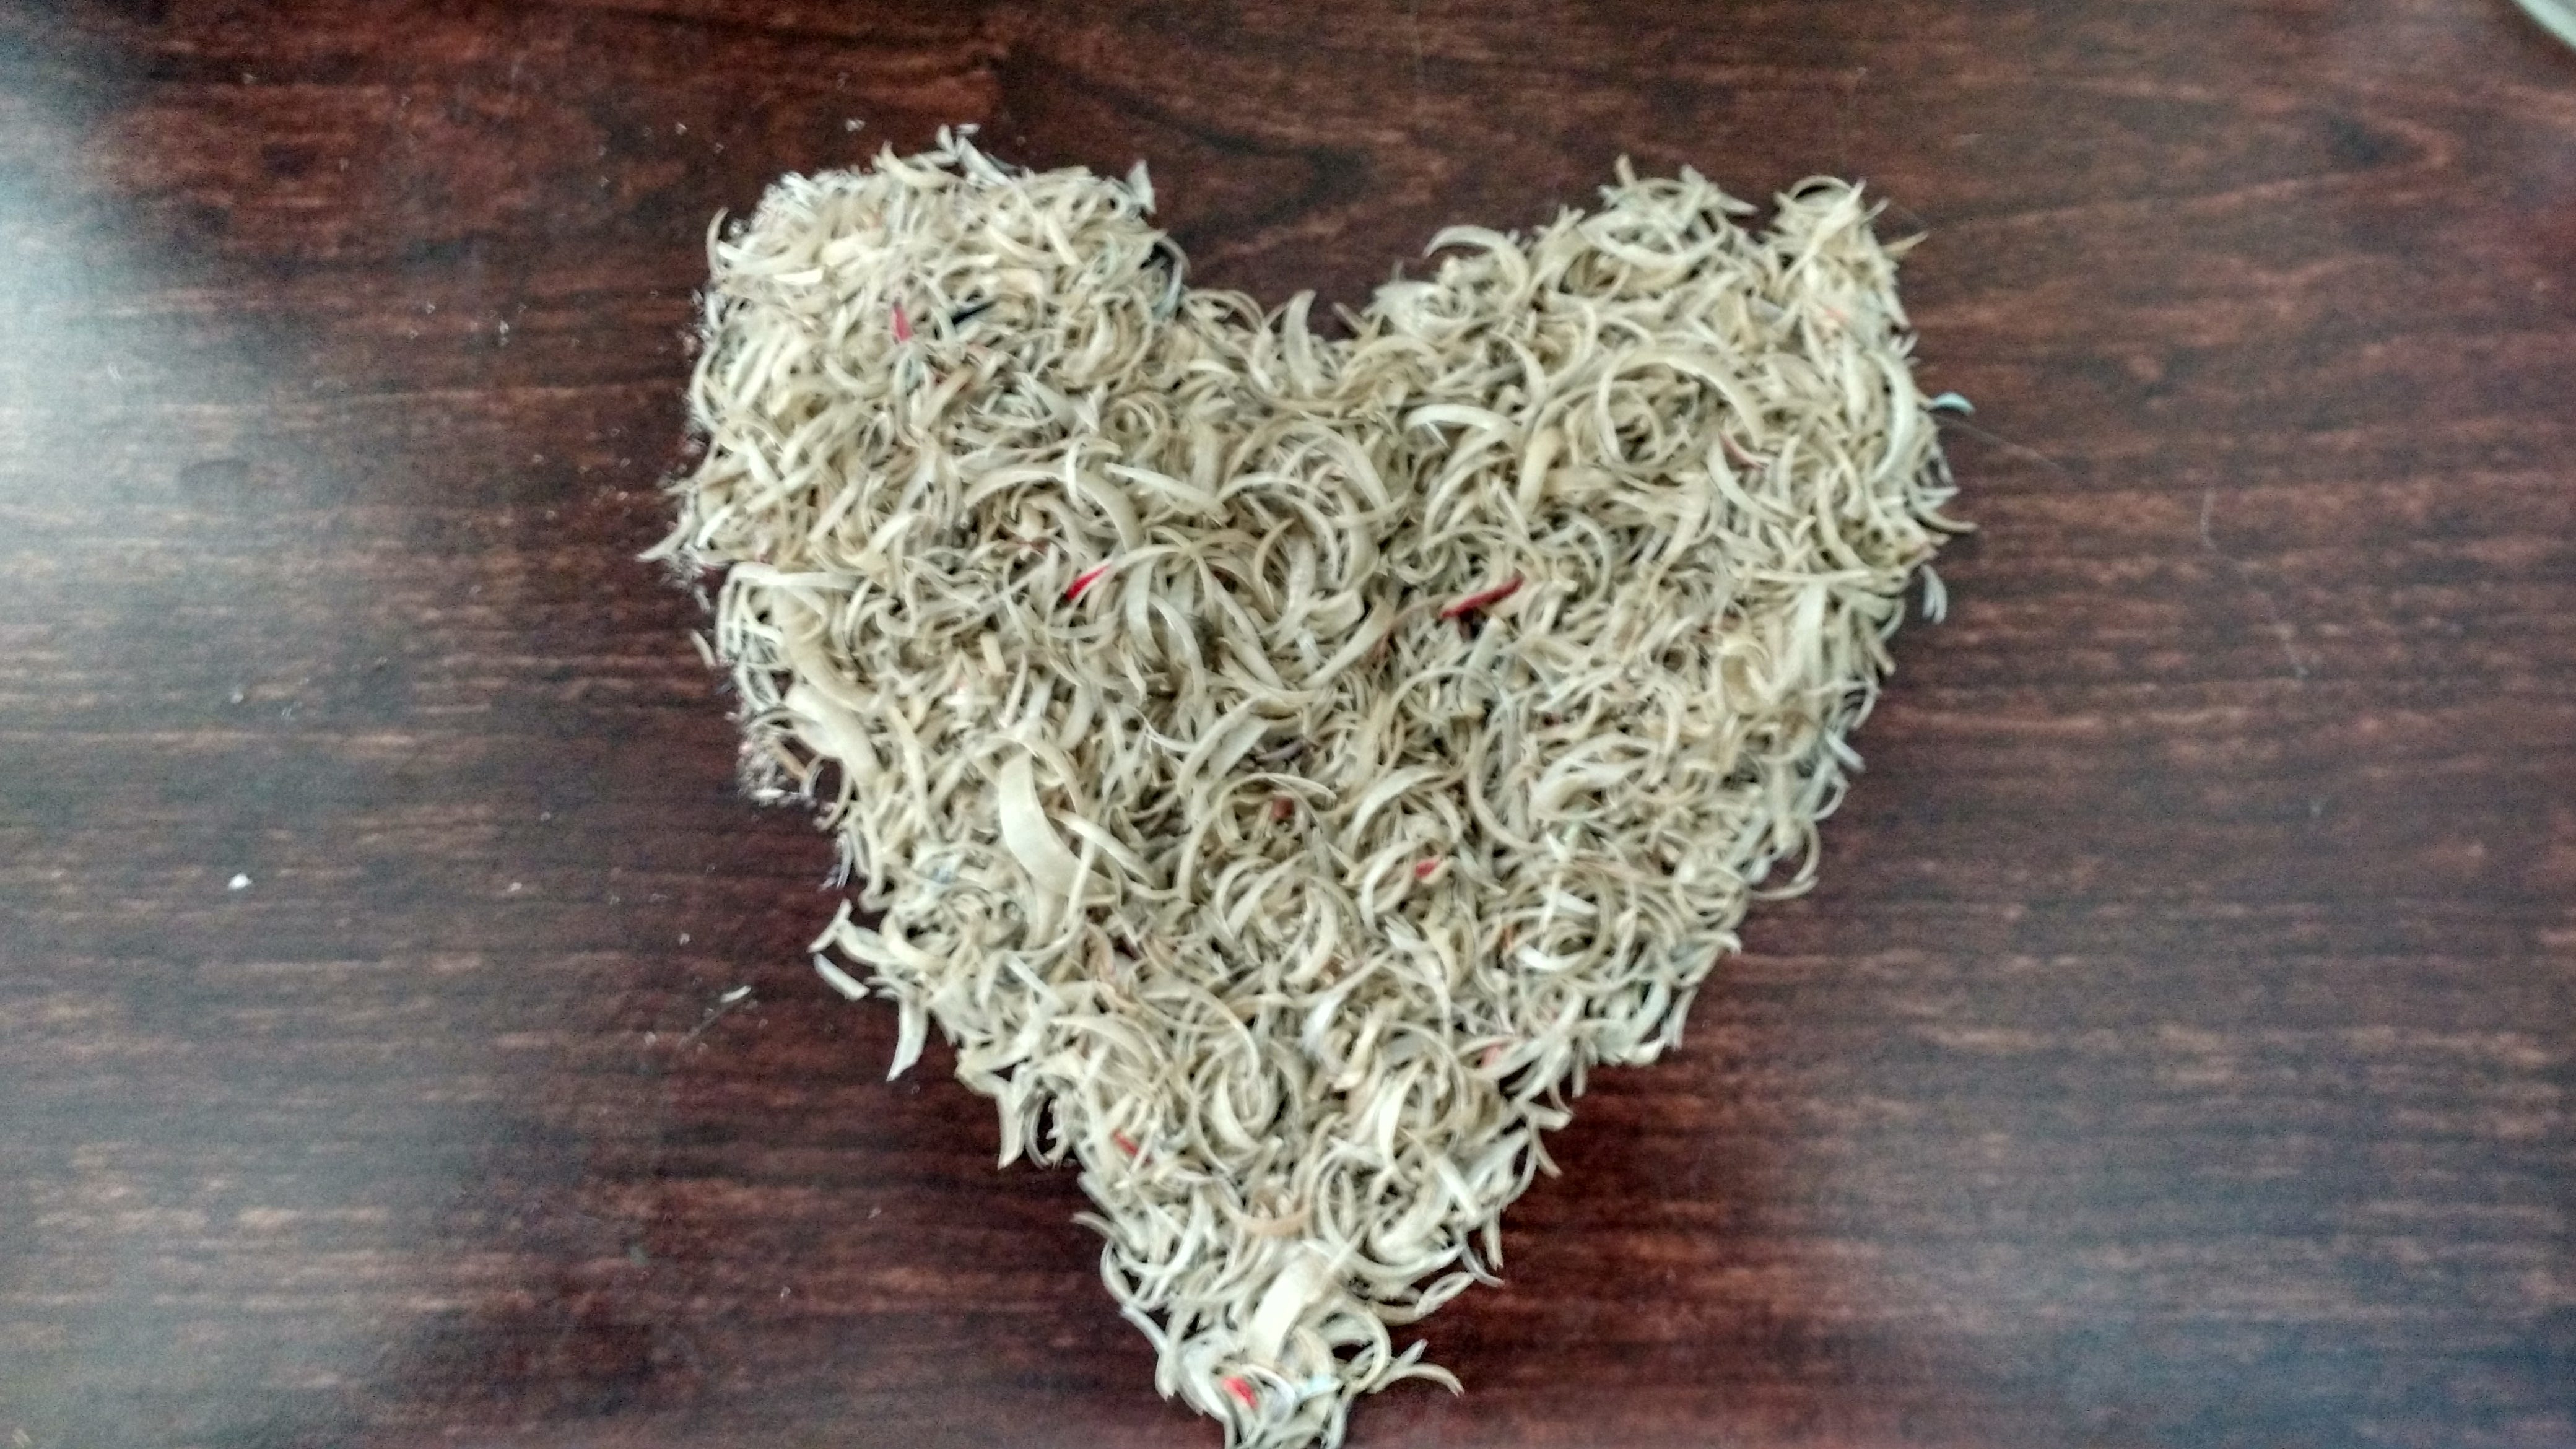 Why I Kept My Nail Clippings in a Jar for 5 Years | by Marc V. Calderaro |  Medium